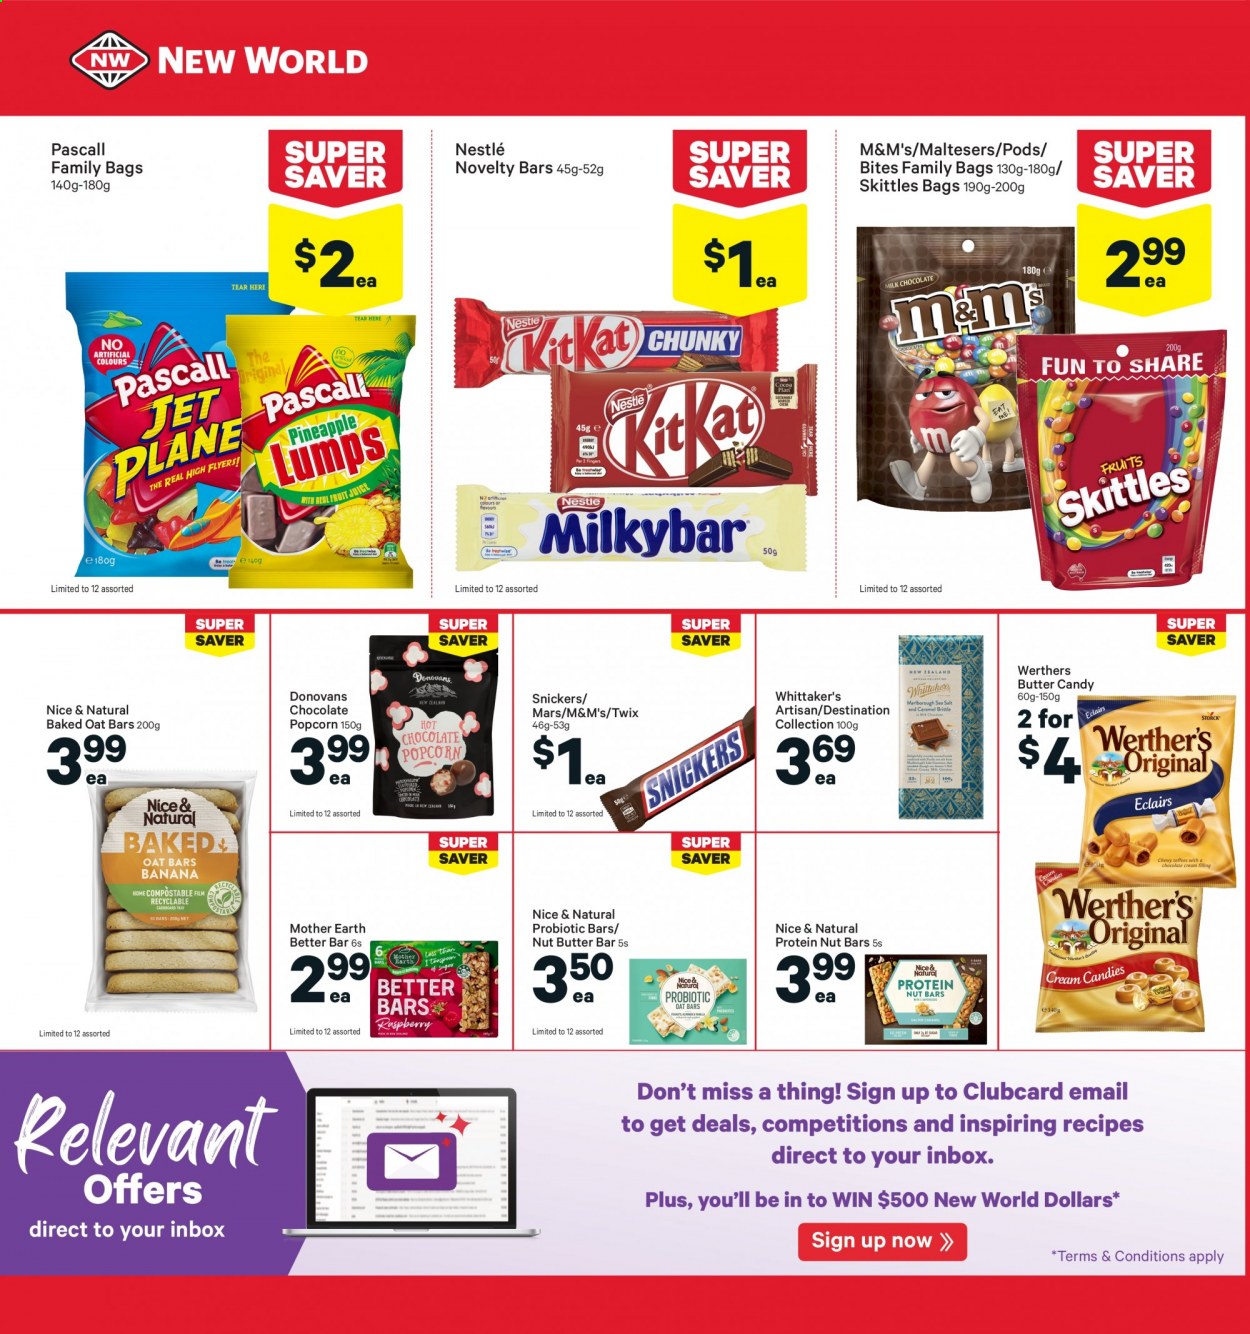 thumbnail - New World mailer - 28.06.2021 - 04.07.2021 - Sales products - Nestlé, chocolate, Snickers, Twix, Mars, M&M's, Maltesers, Mother Earth, Whittaker's, Donovans, Skittles, popcorn, nut bar. Page 16.